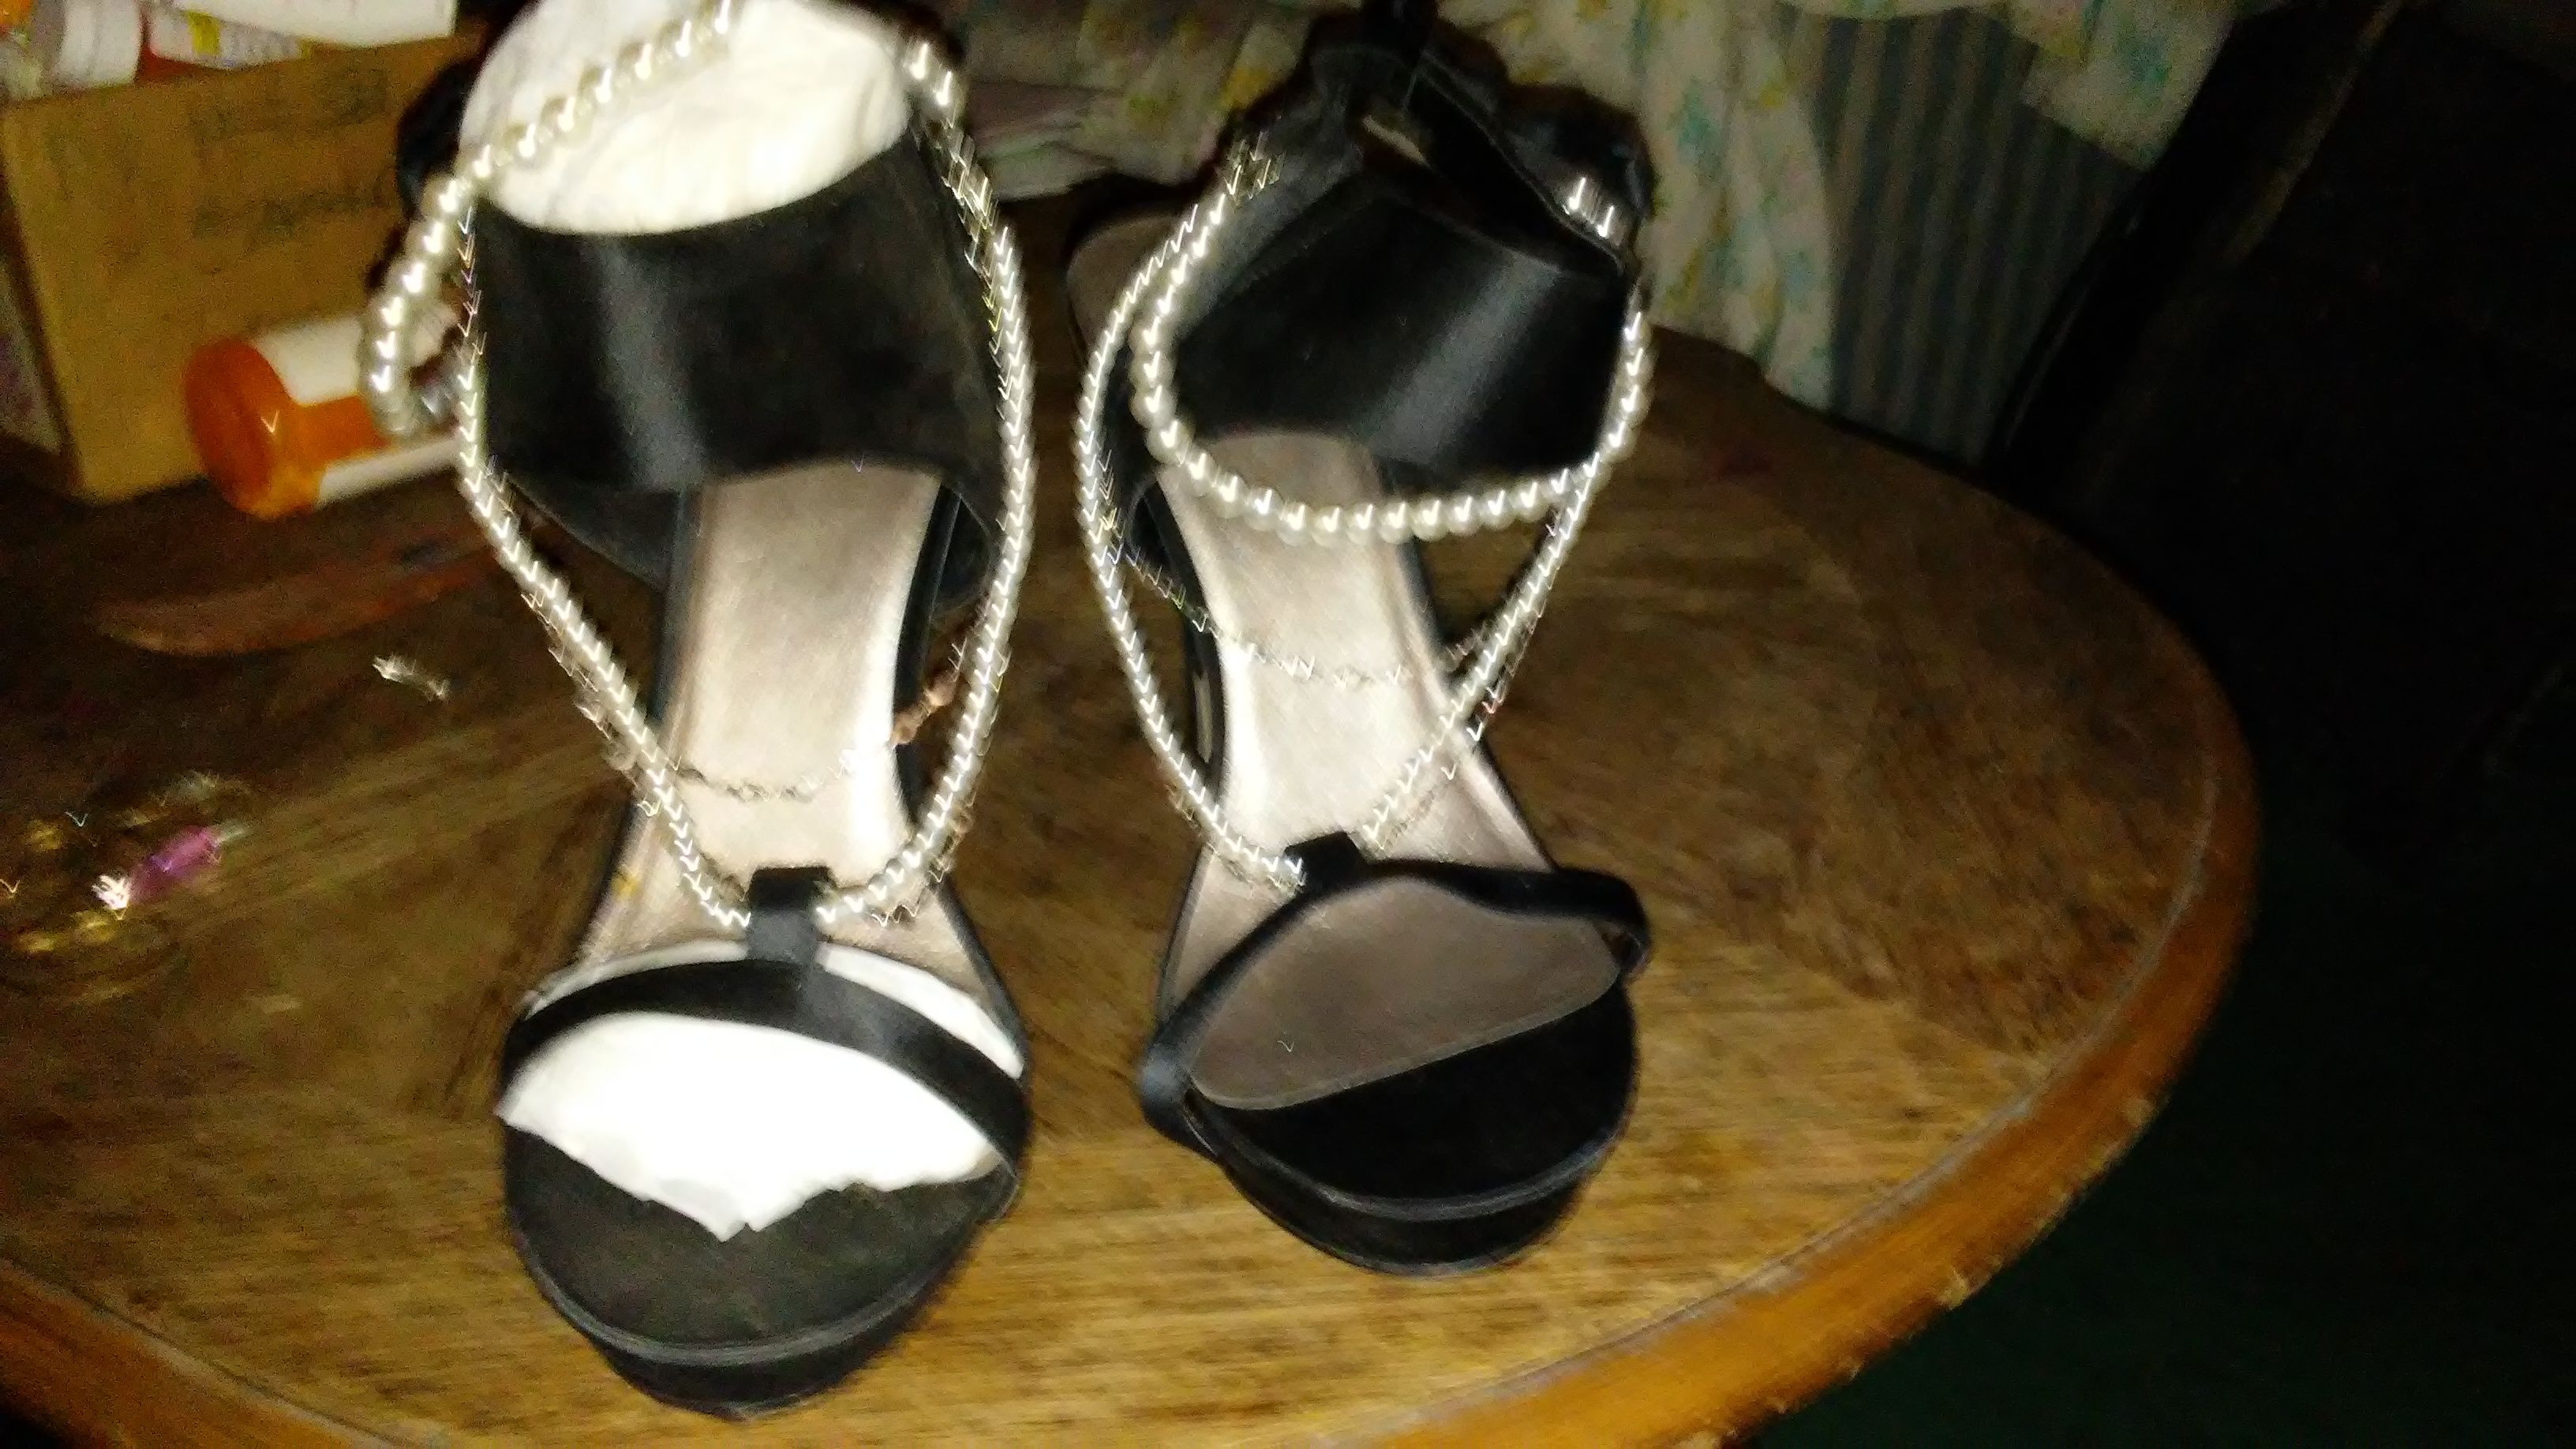 High heels they are hand made never worn. Price is negotiable... Has chains and pearl needs to go with them